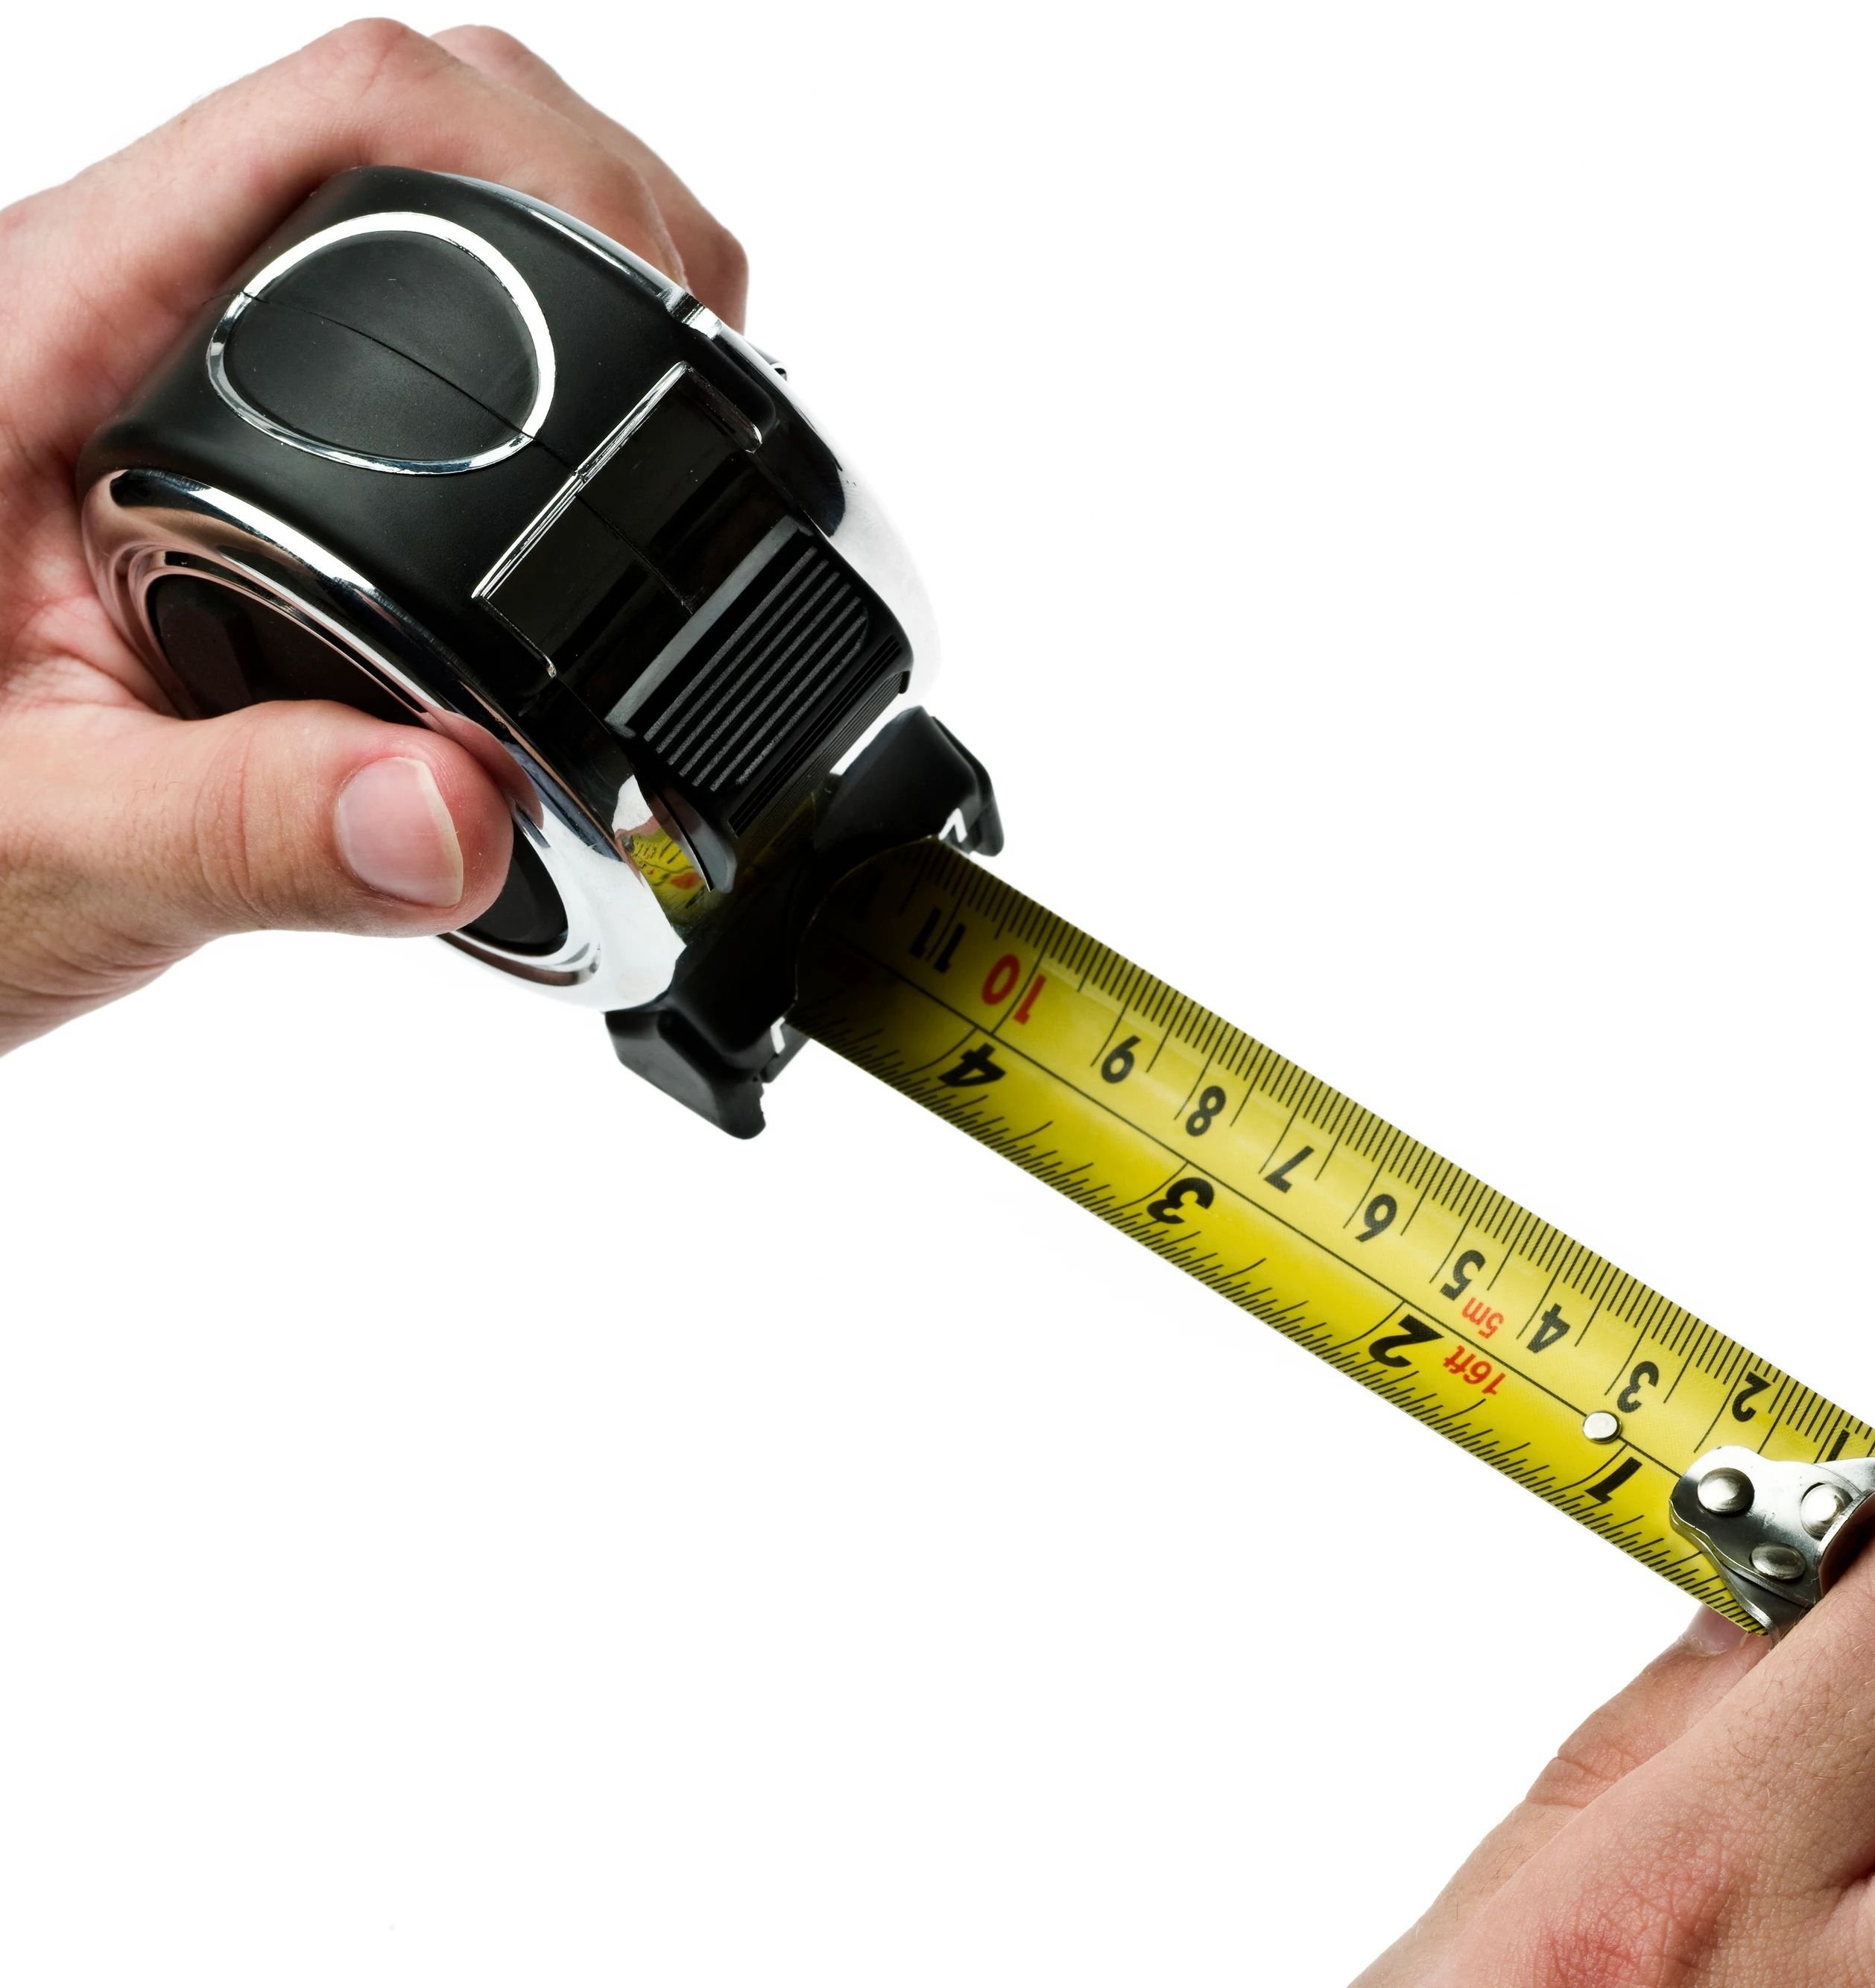 measuring tape - Main Street Carpets and Flooring in Texas City, TX